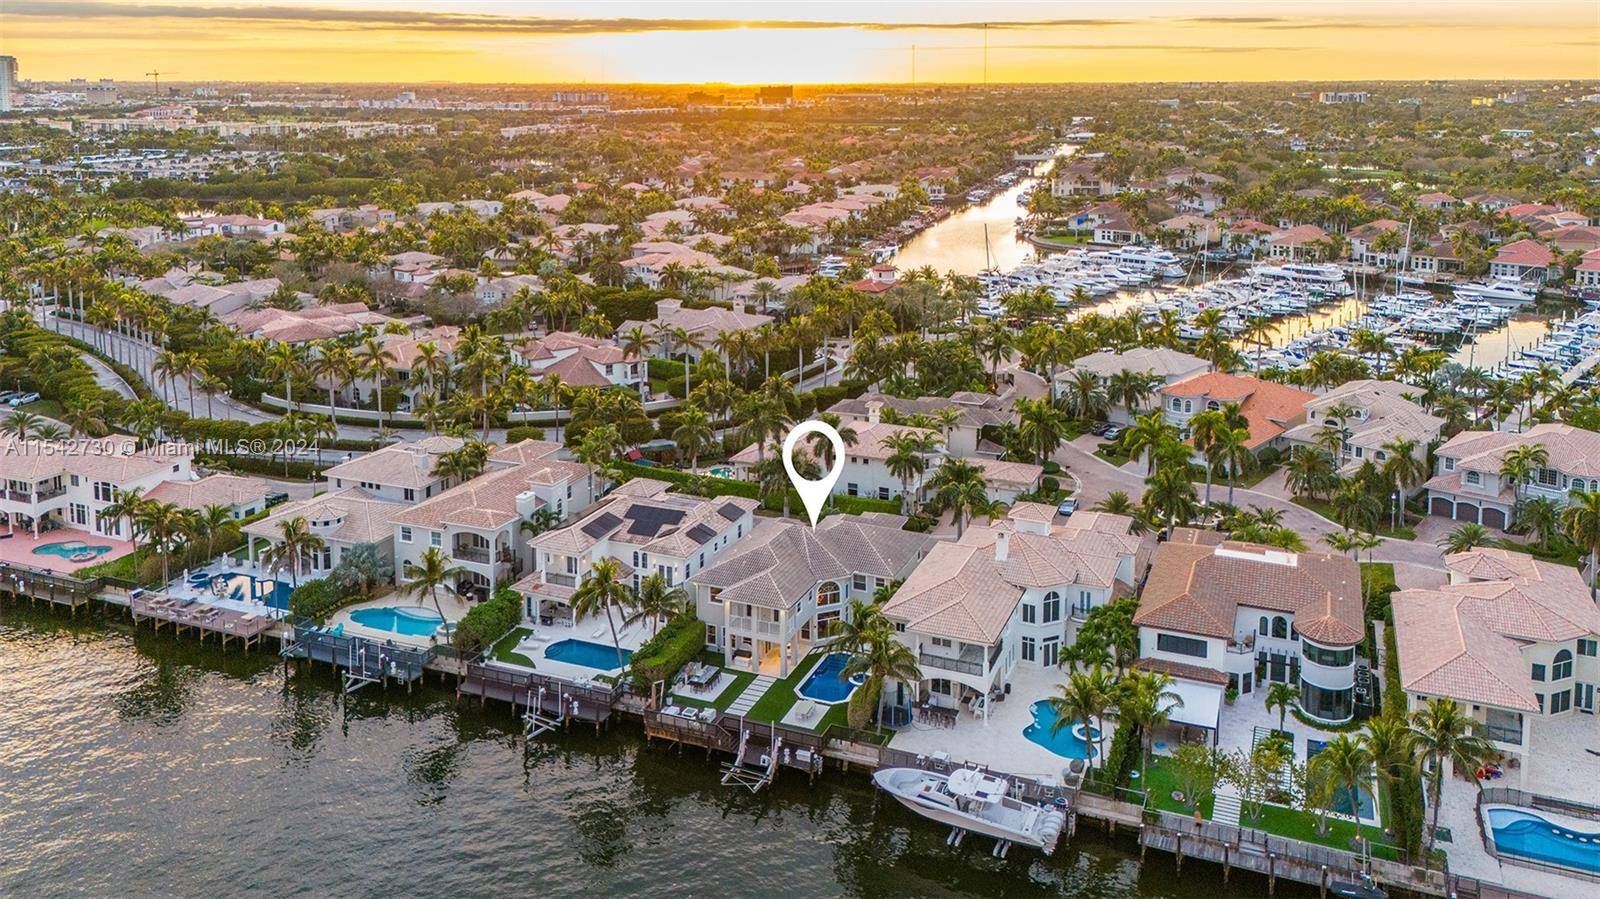 Experience waterfront luxury living in this stunning totally updated turn key estate in the private gated community of Harbor Islands.